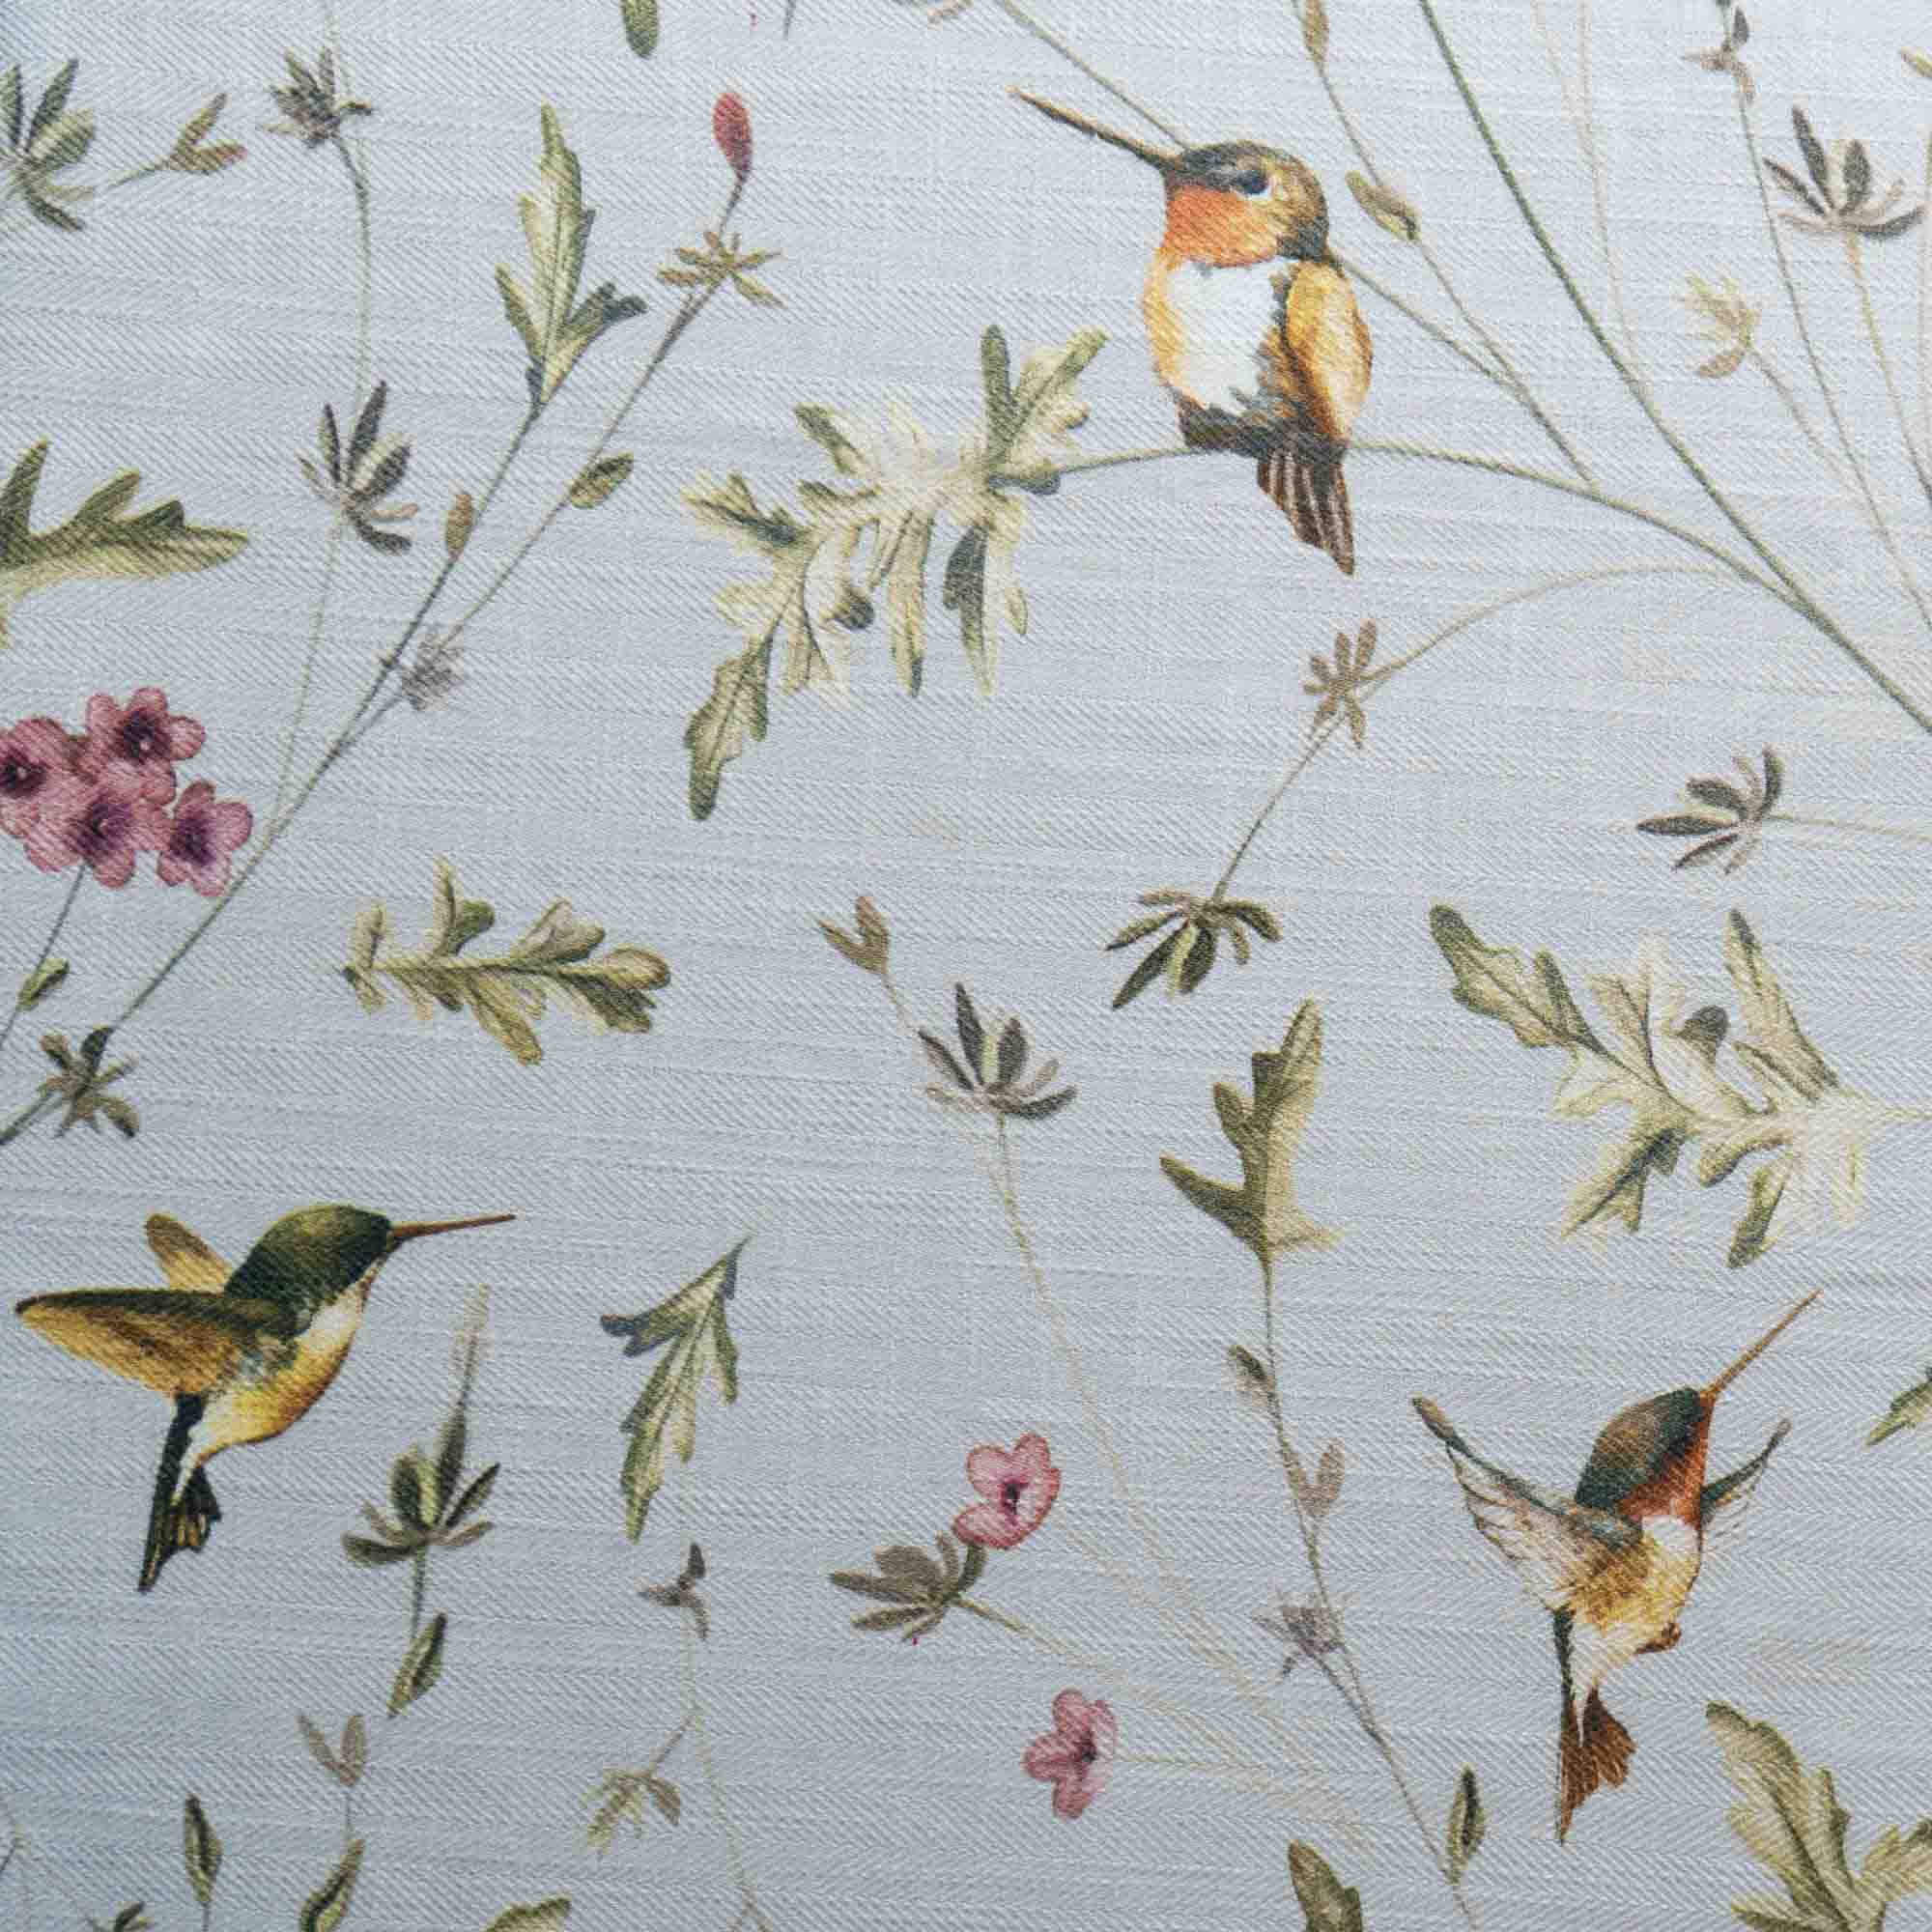 Anna's Humming Bird in Clouds Cotton Linen Blend Fabric (Vertical Repeat)